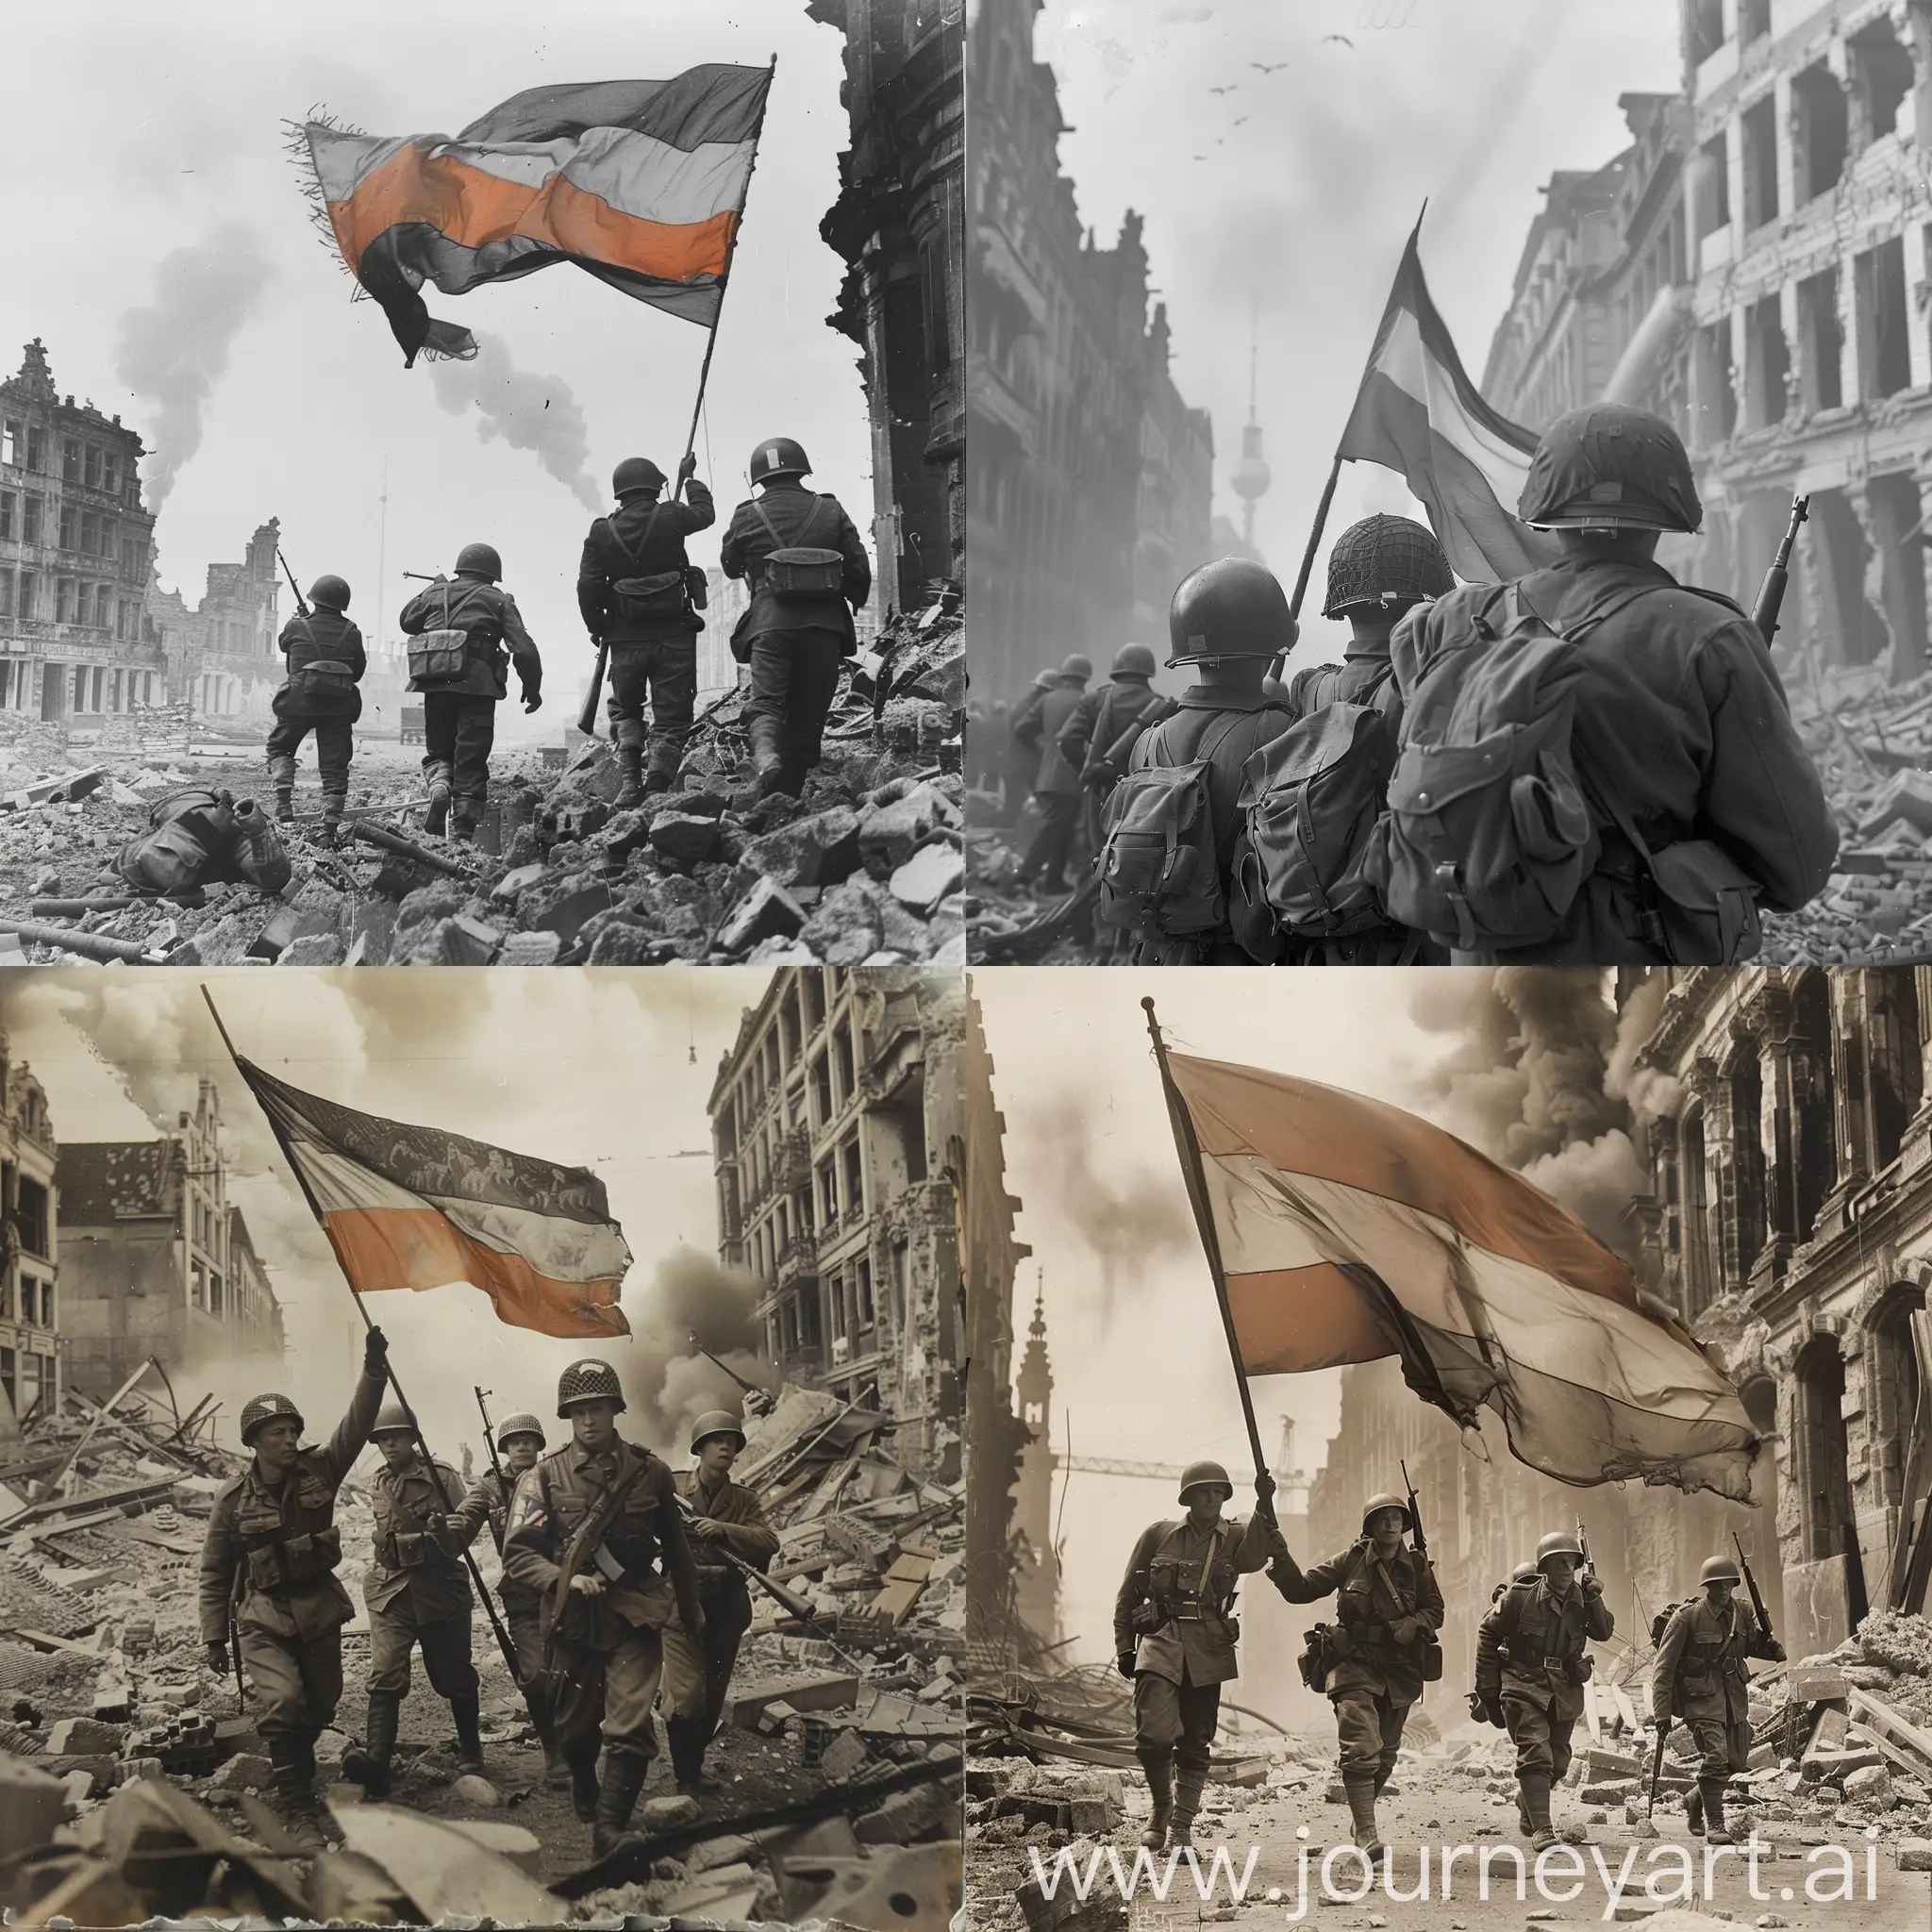 soldiers with the flag of the Netherlands in their hands storm Berlin during the Second World War